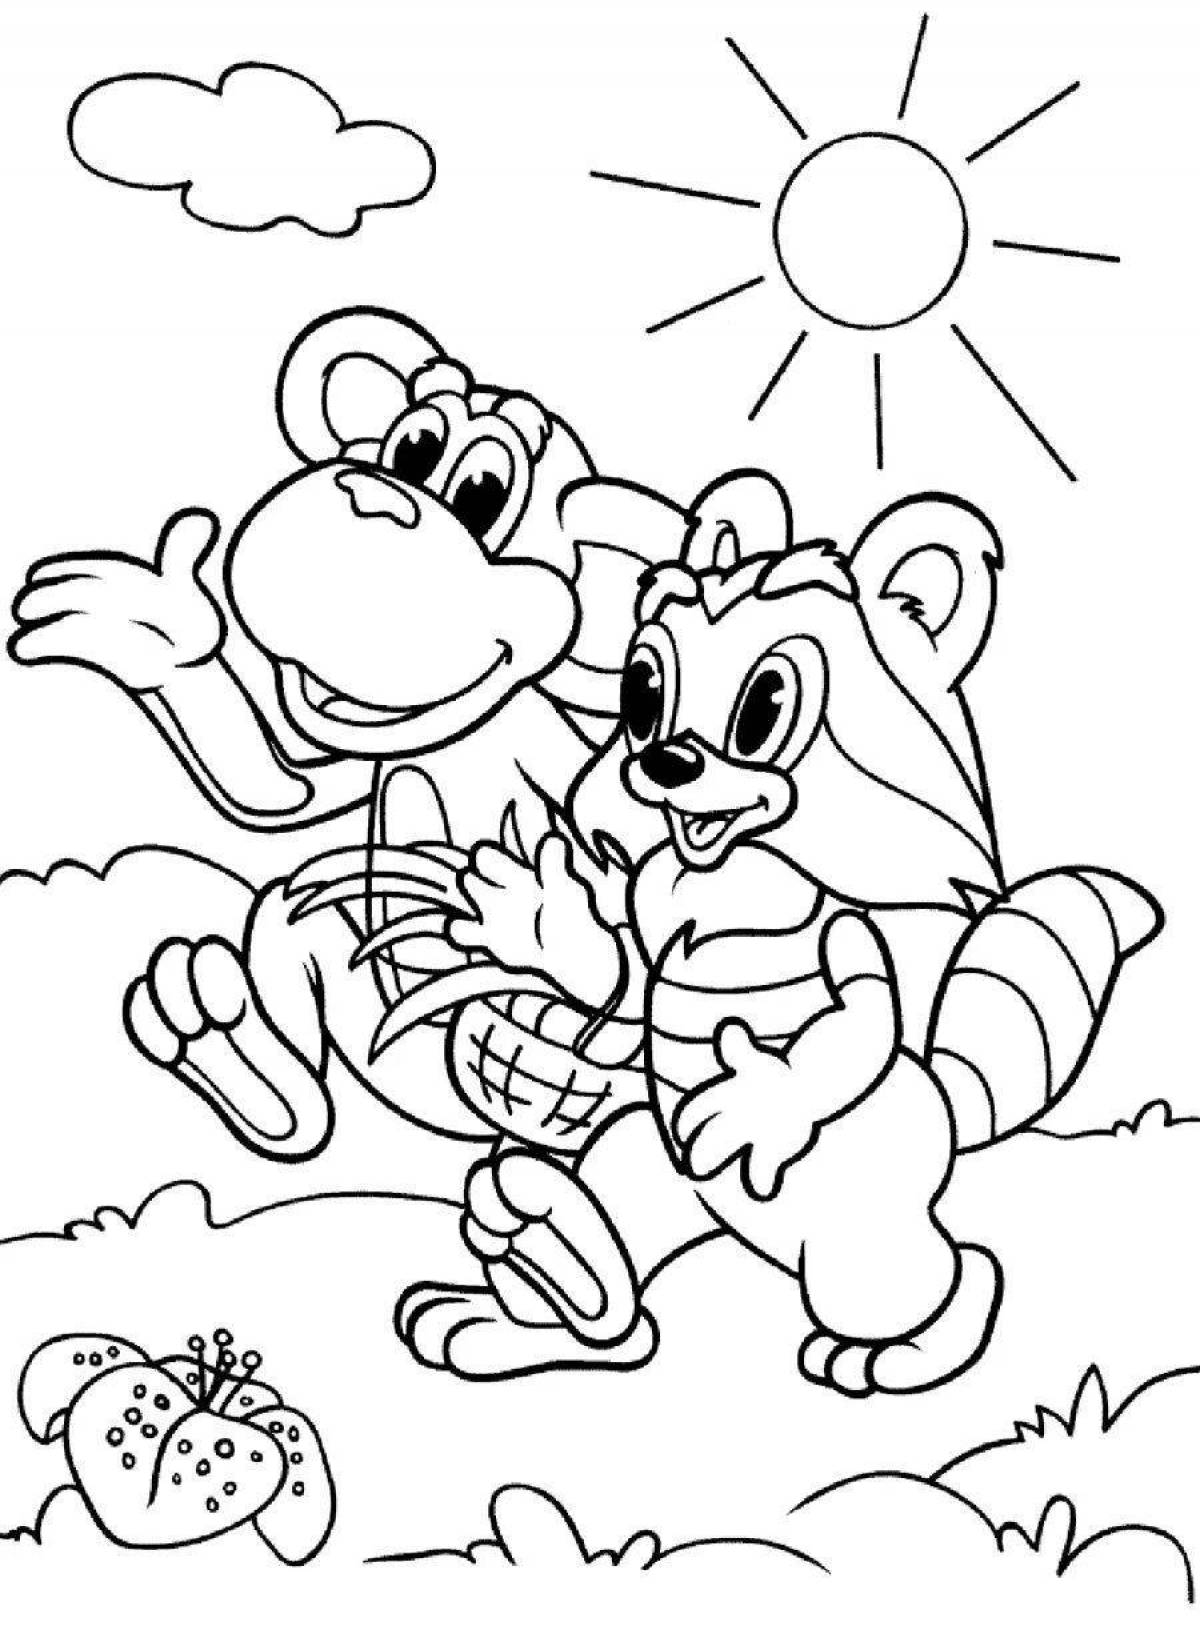 Awesome cartoon coloring book